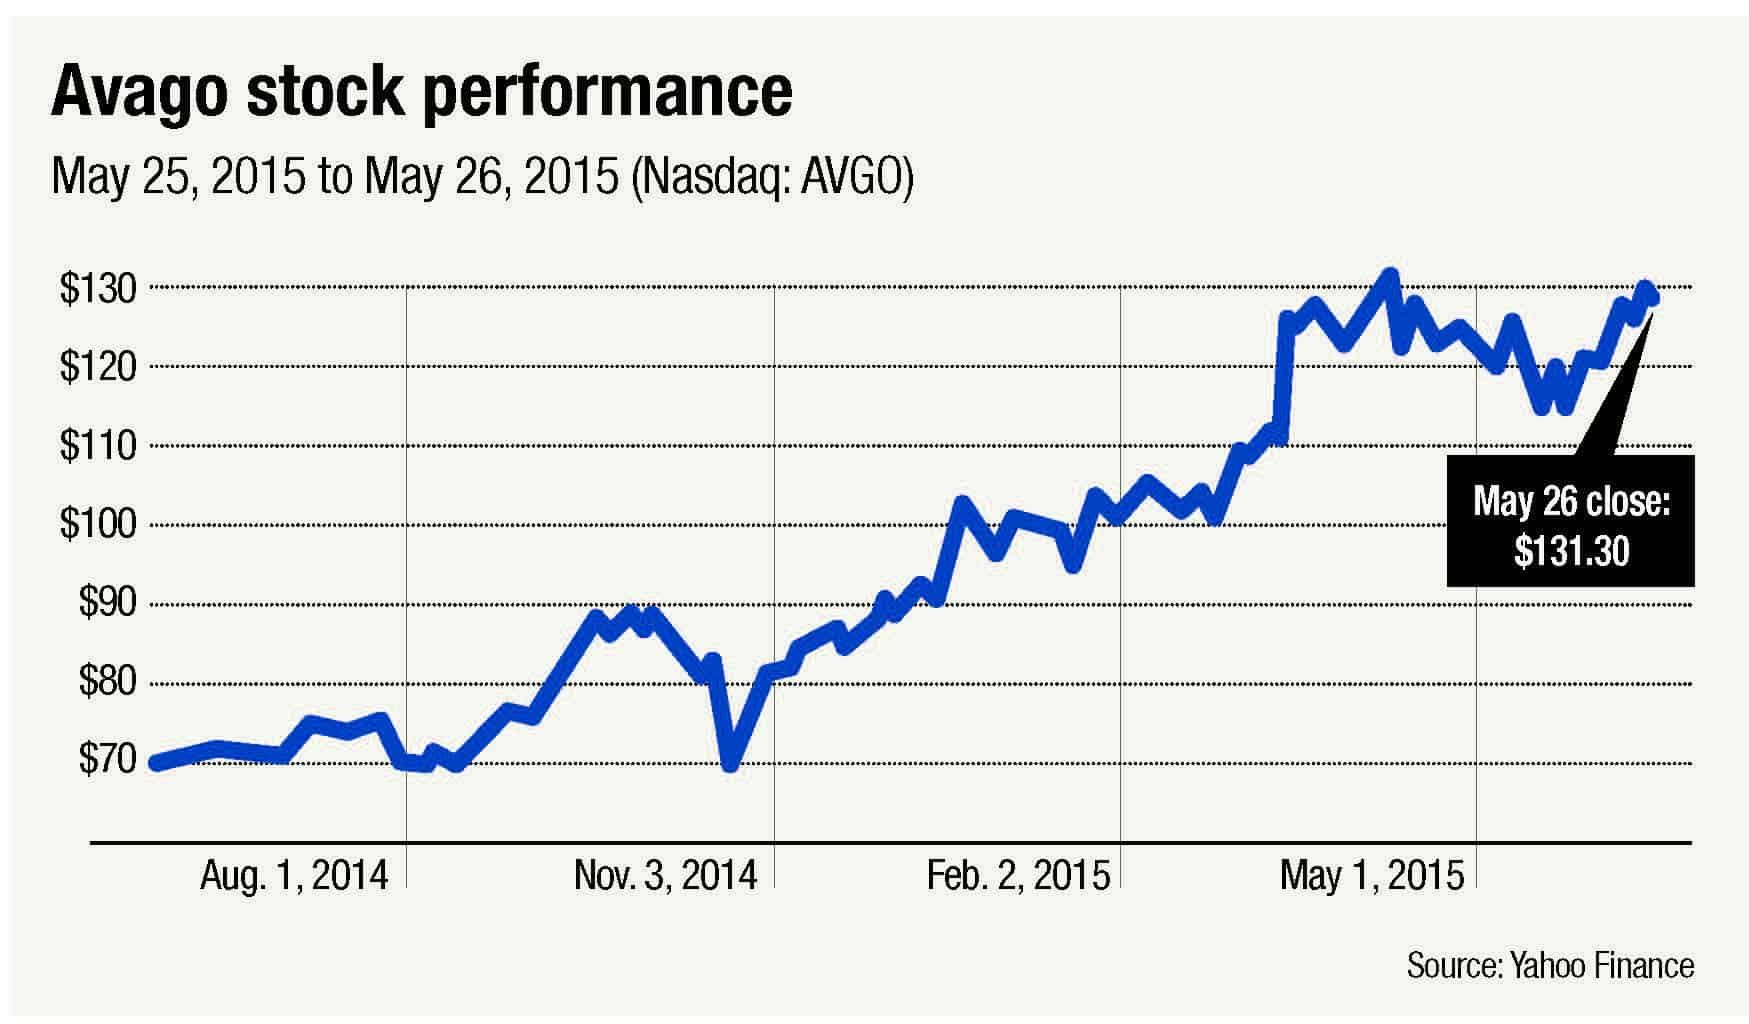 Avago's 1-year stock performance